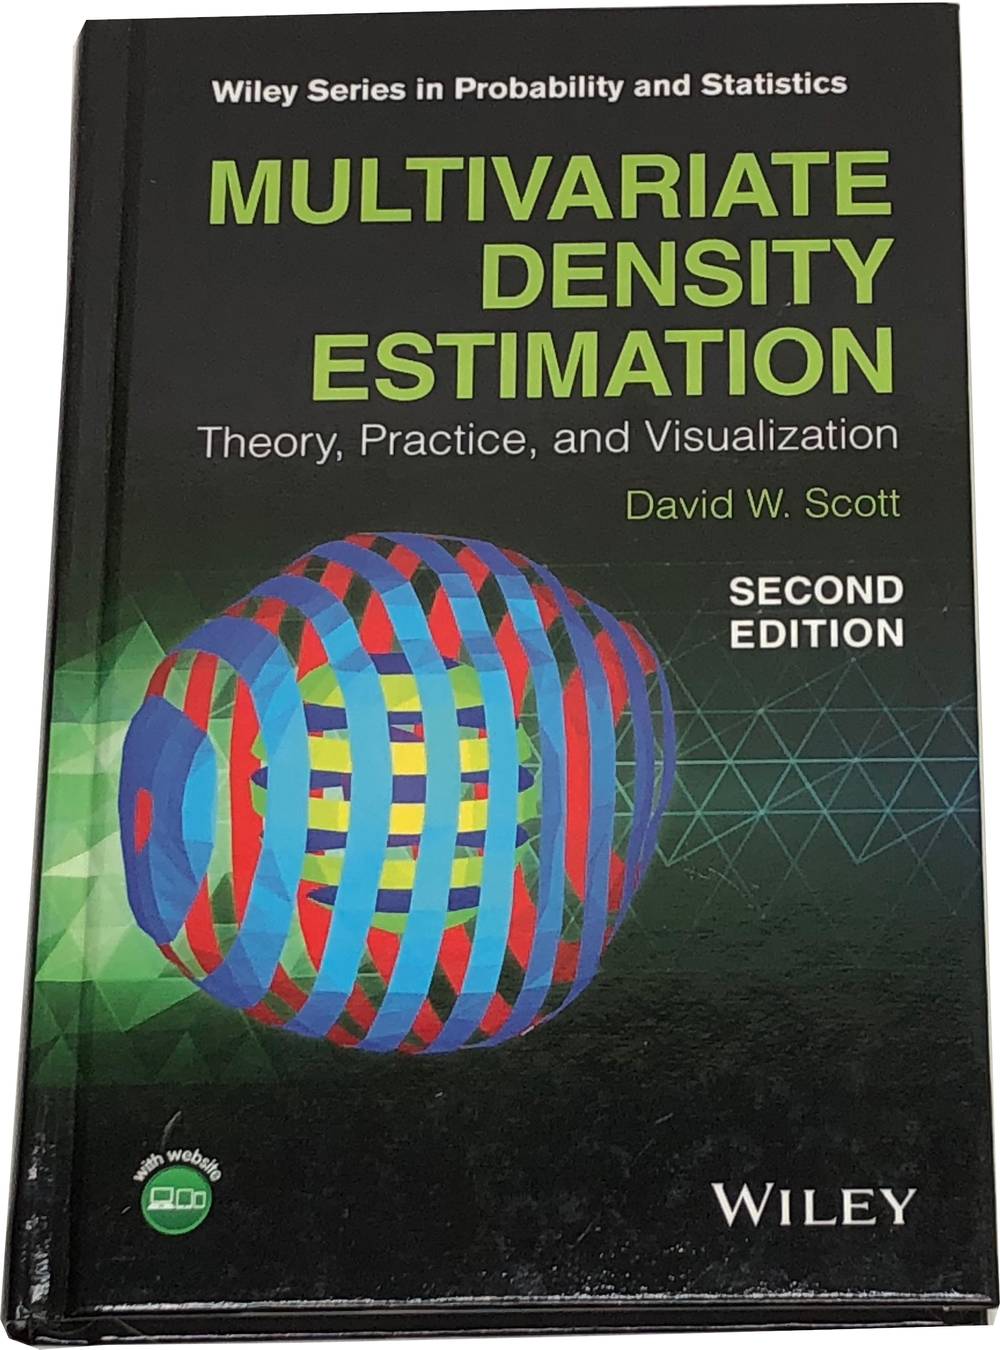 Book image of Multivariate Density Estimation: Theory, Practice, and Visualization.